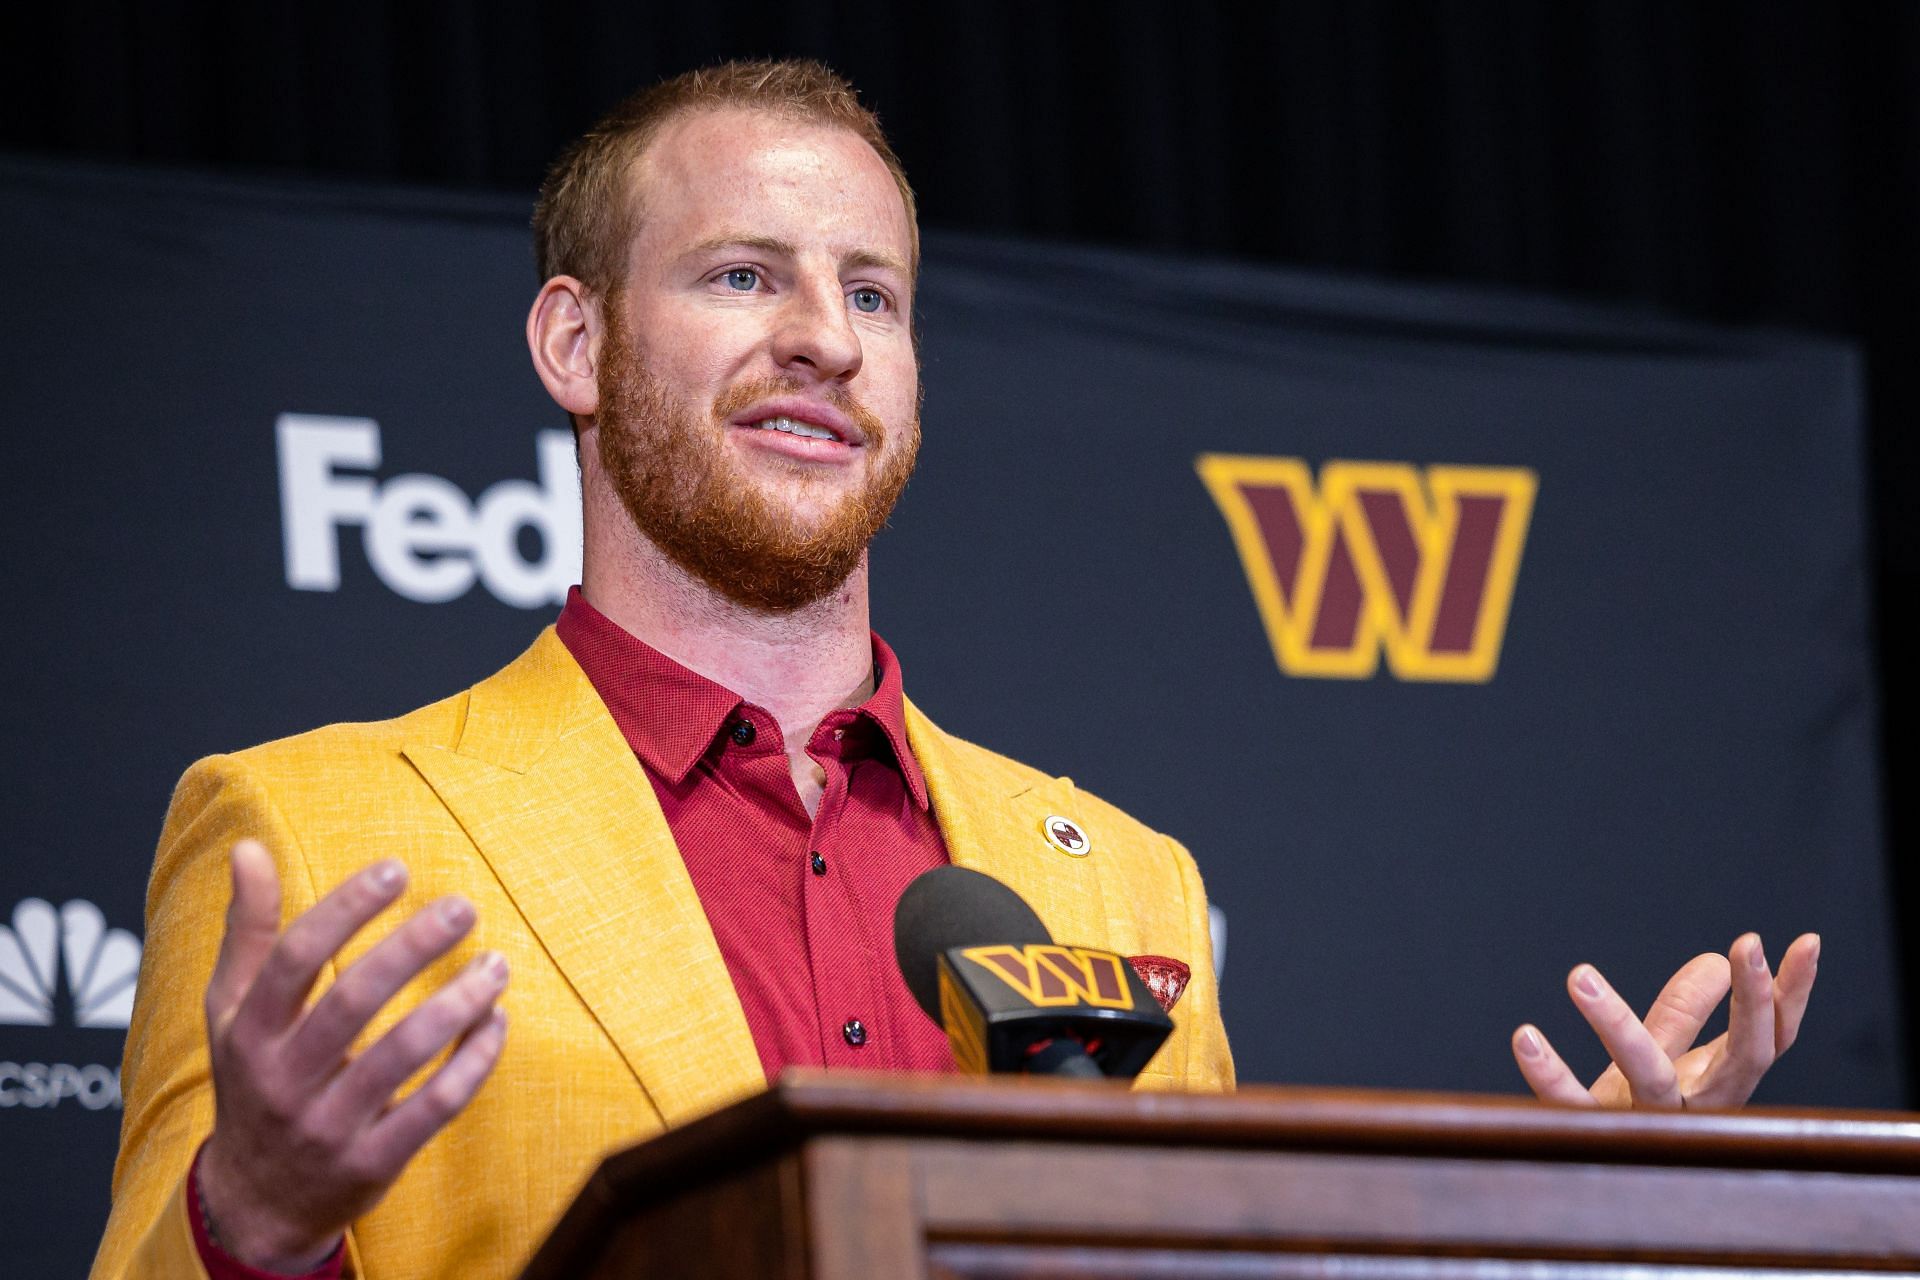 Carson Wentz will be with his third NFL team after signing with Washington